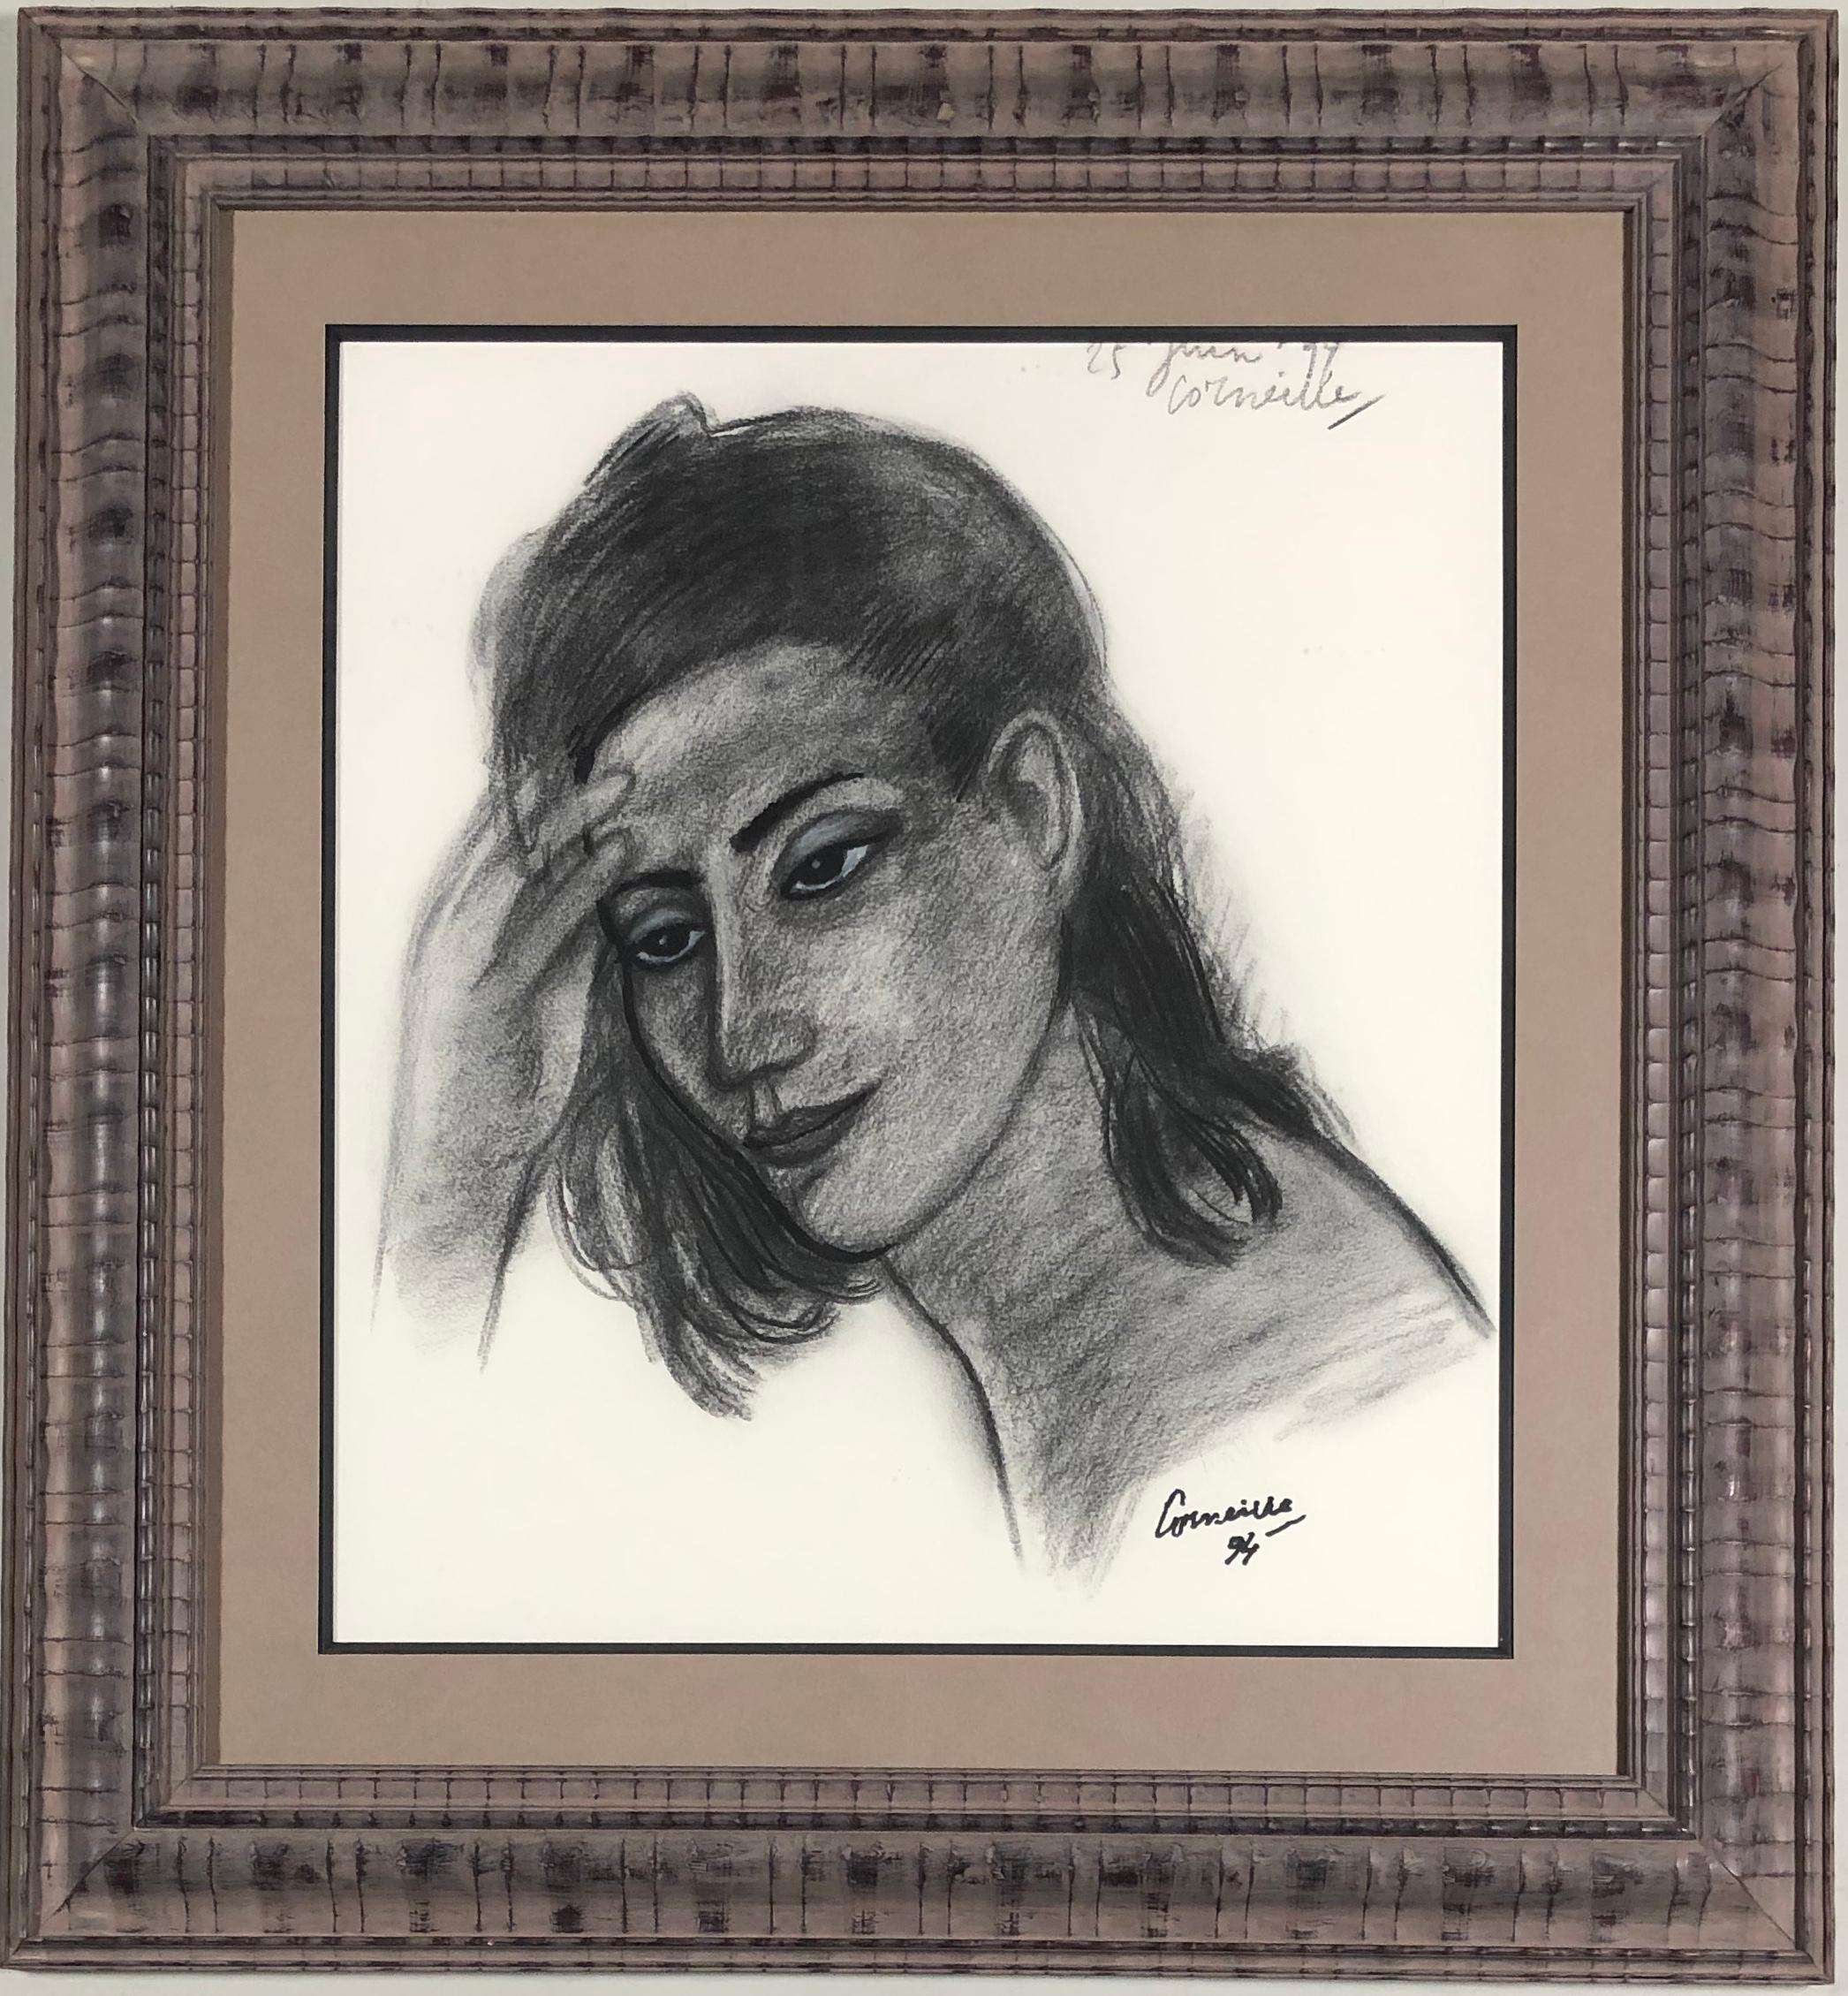 Guillaume Cornelis van Beverloo (Corneille) Nude - Portrait of a woman. Charcoal. Signed and dated '25th of June (19)99'